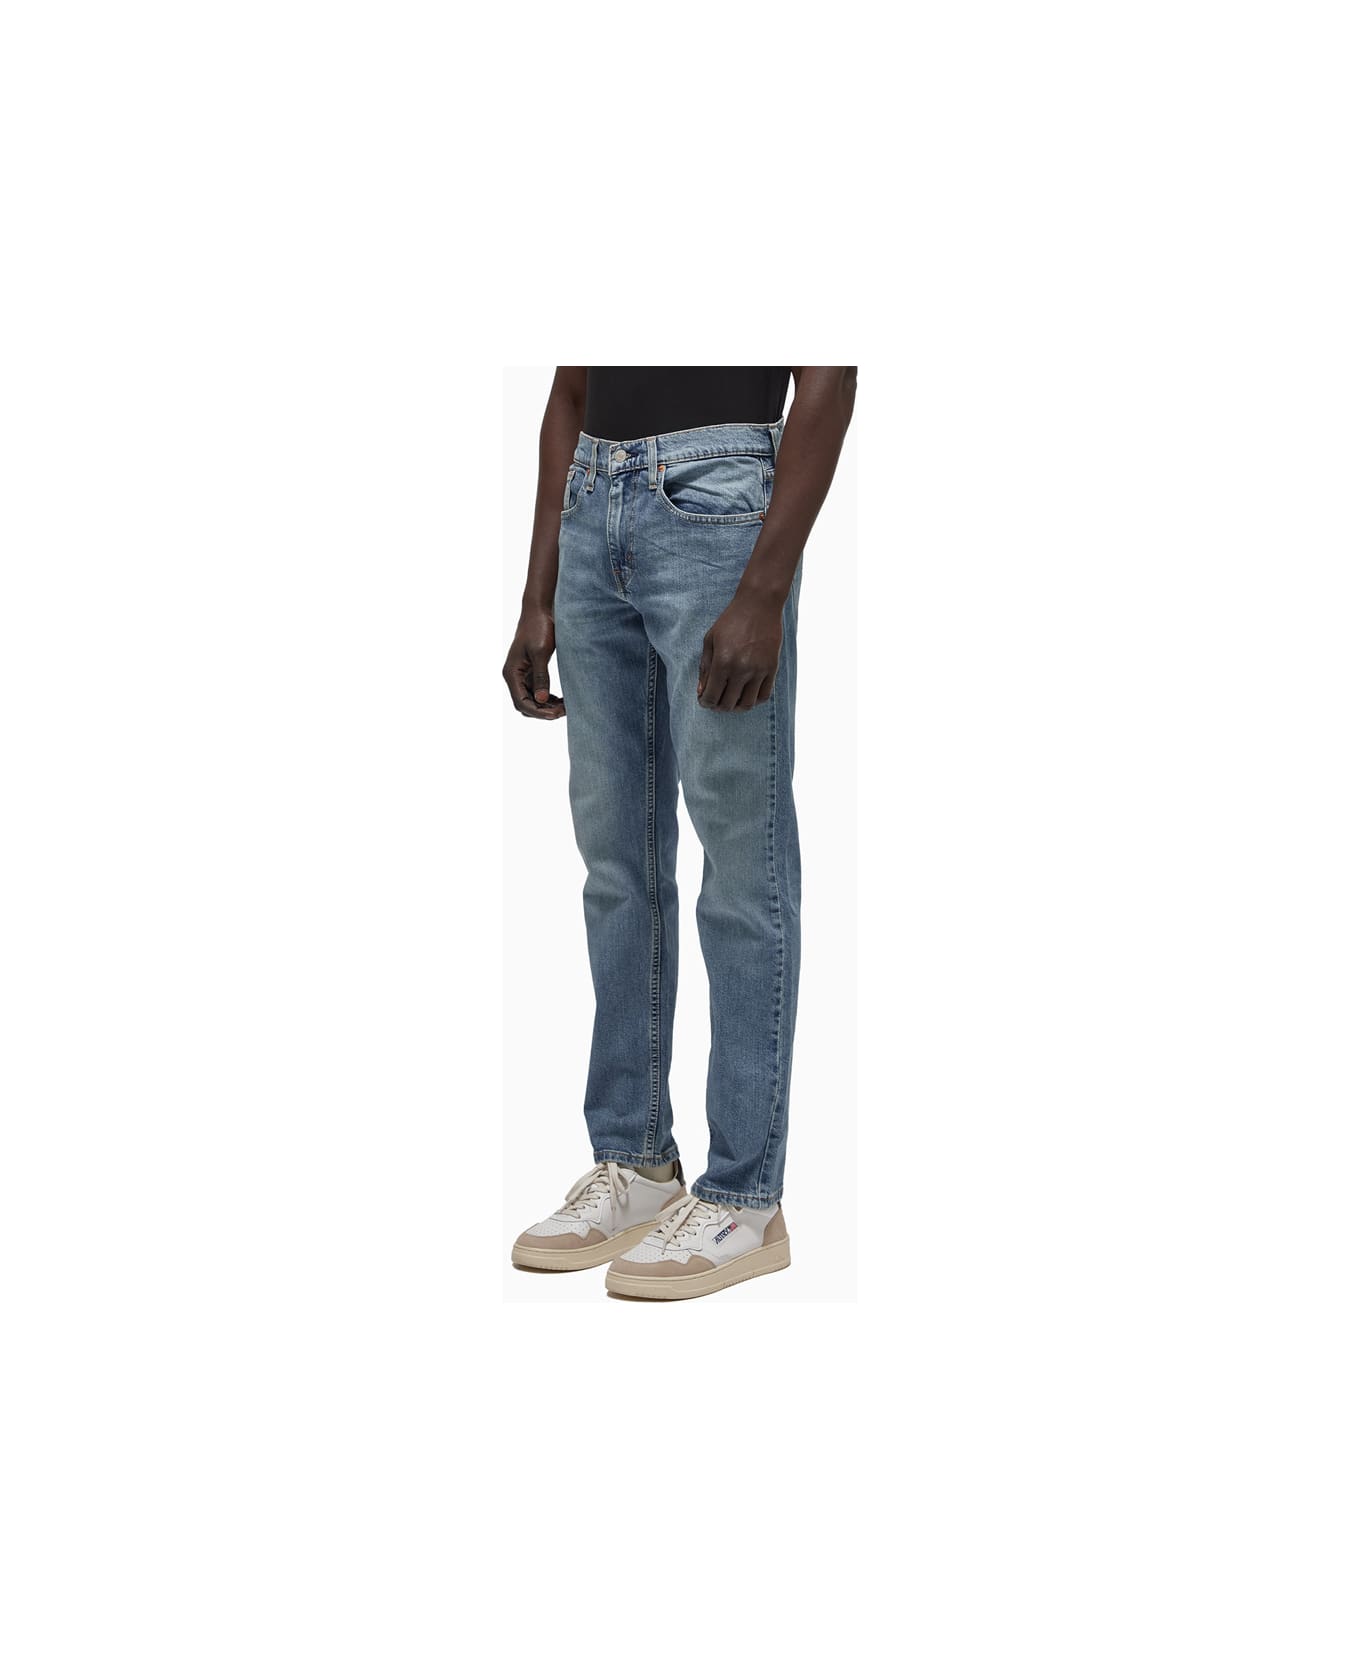 Levi's Levis 502 Into The Thick Of It Adv Jeans - Blue デニム